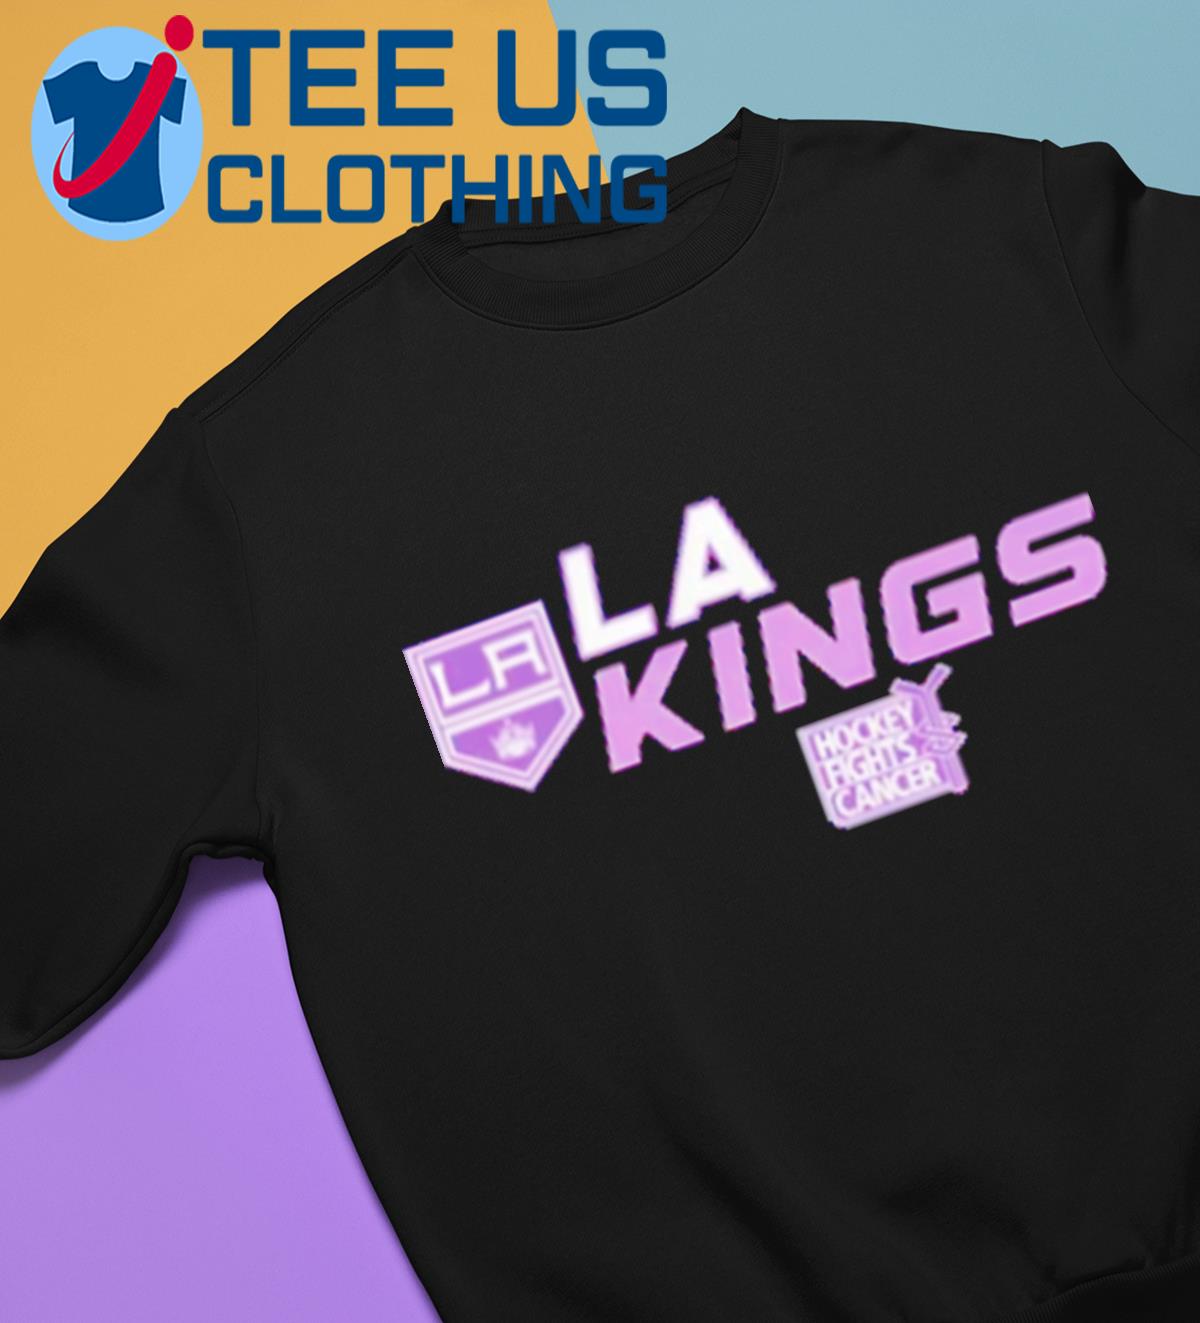 Los Angeles Kings Jersey For Youth, Women, or Men